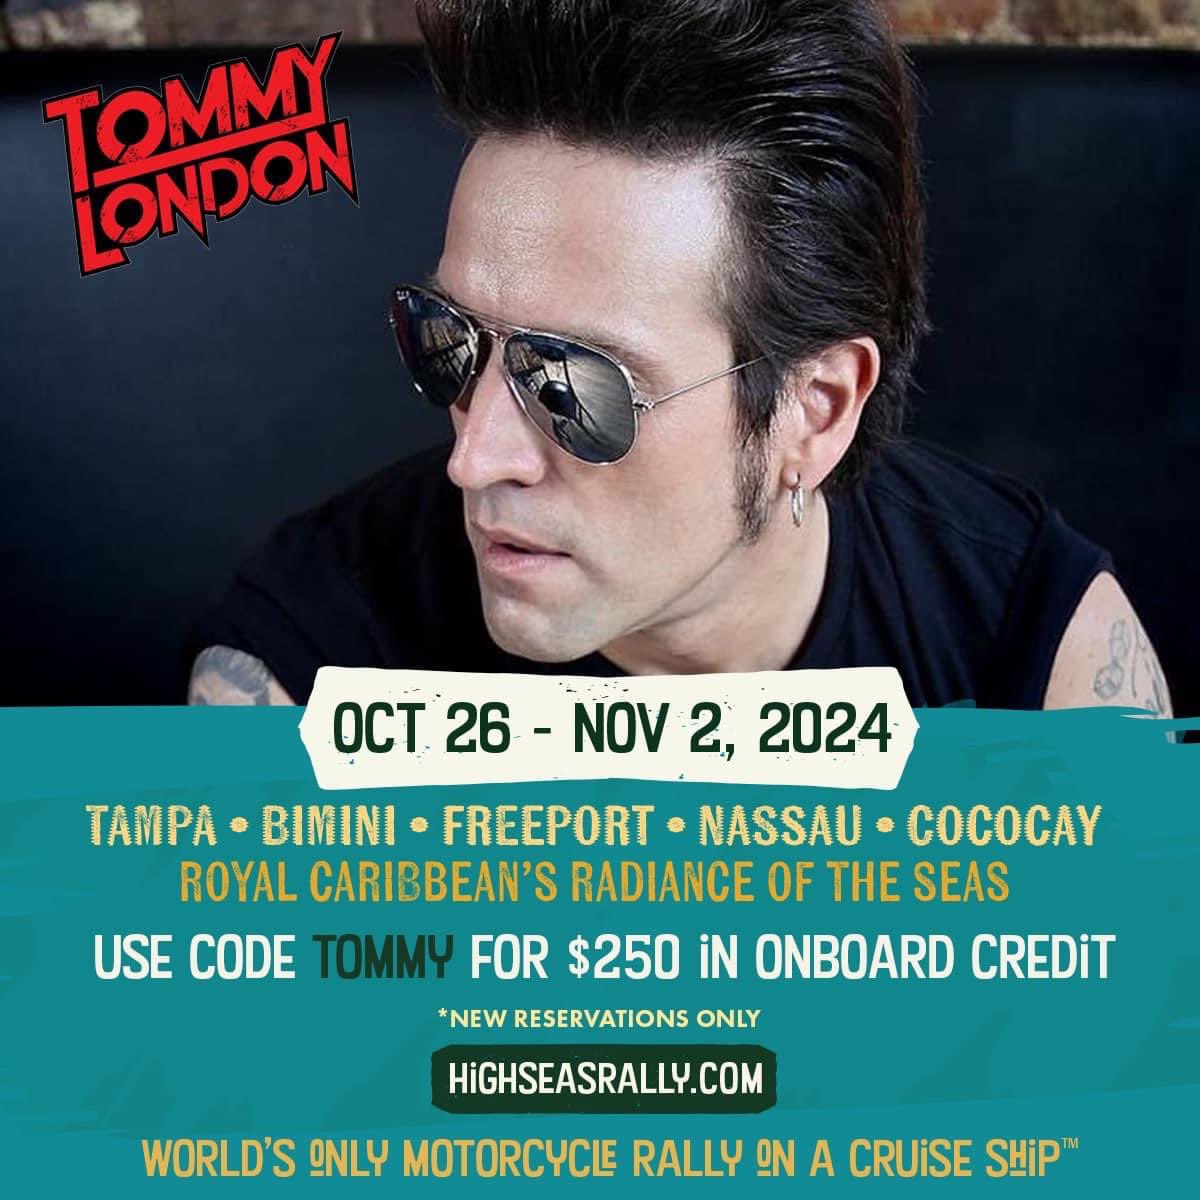 Who’s hopping on the boat in October w/me? I can’t wait for the @HighSeasRally Vixen & Lou Gramm of Foreigner fame will be with me as well! Listen up! Get $250 on board credit when you use code TOMMY! Go here for tix/info👉🏽 highseasrally.com LETS DO THIS! 🤘🏽 #cruise2024